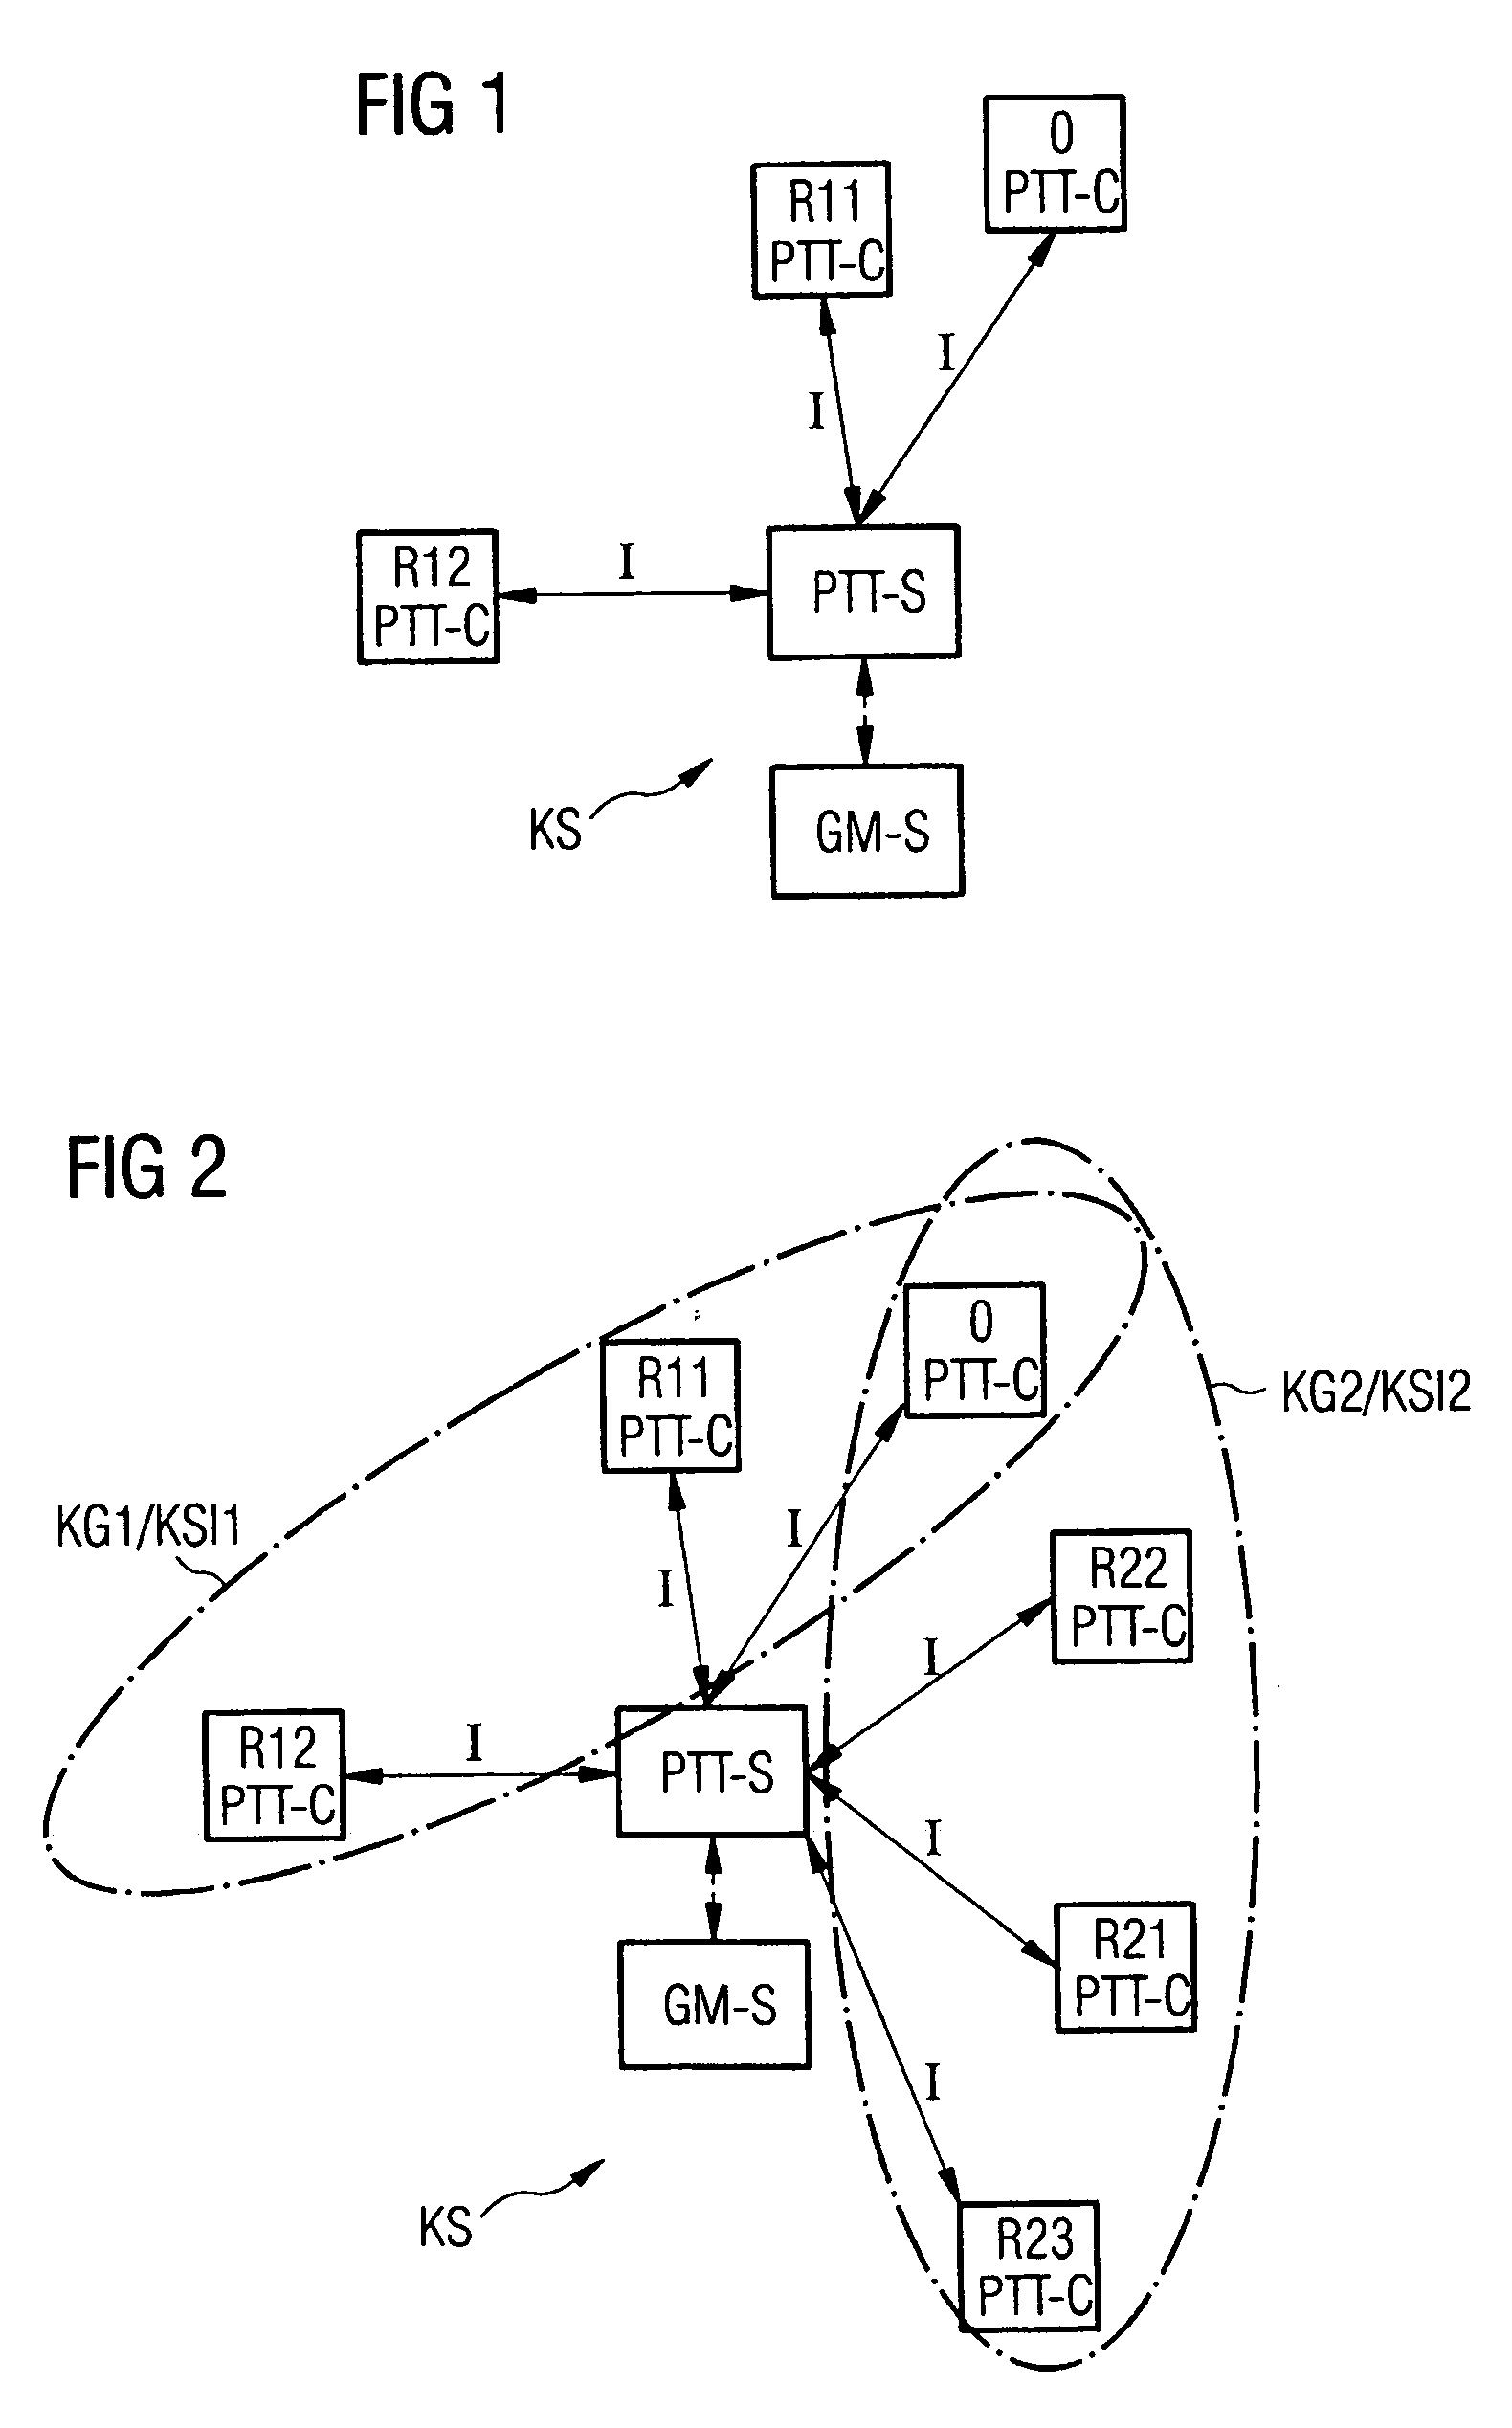 Method for managing communication sessions